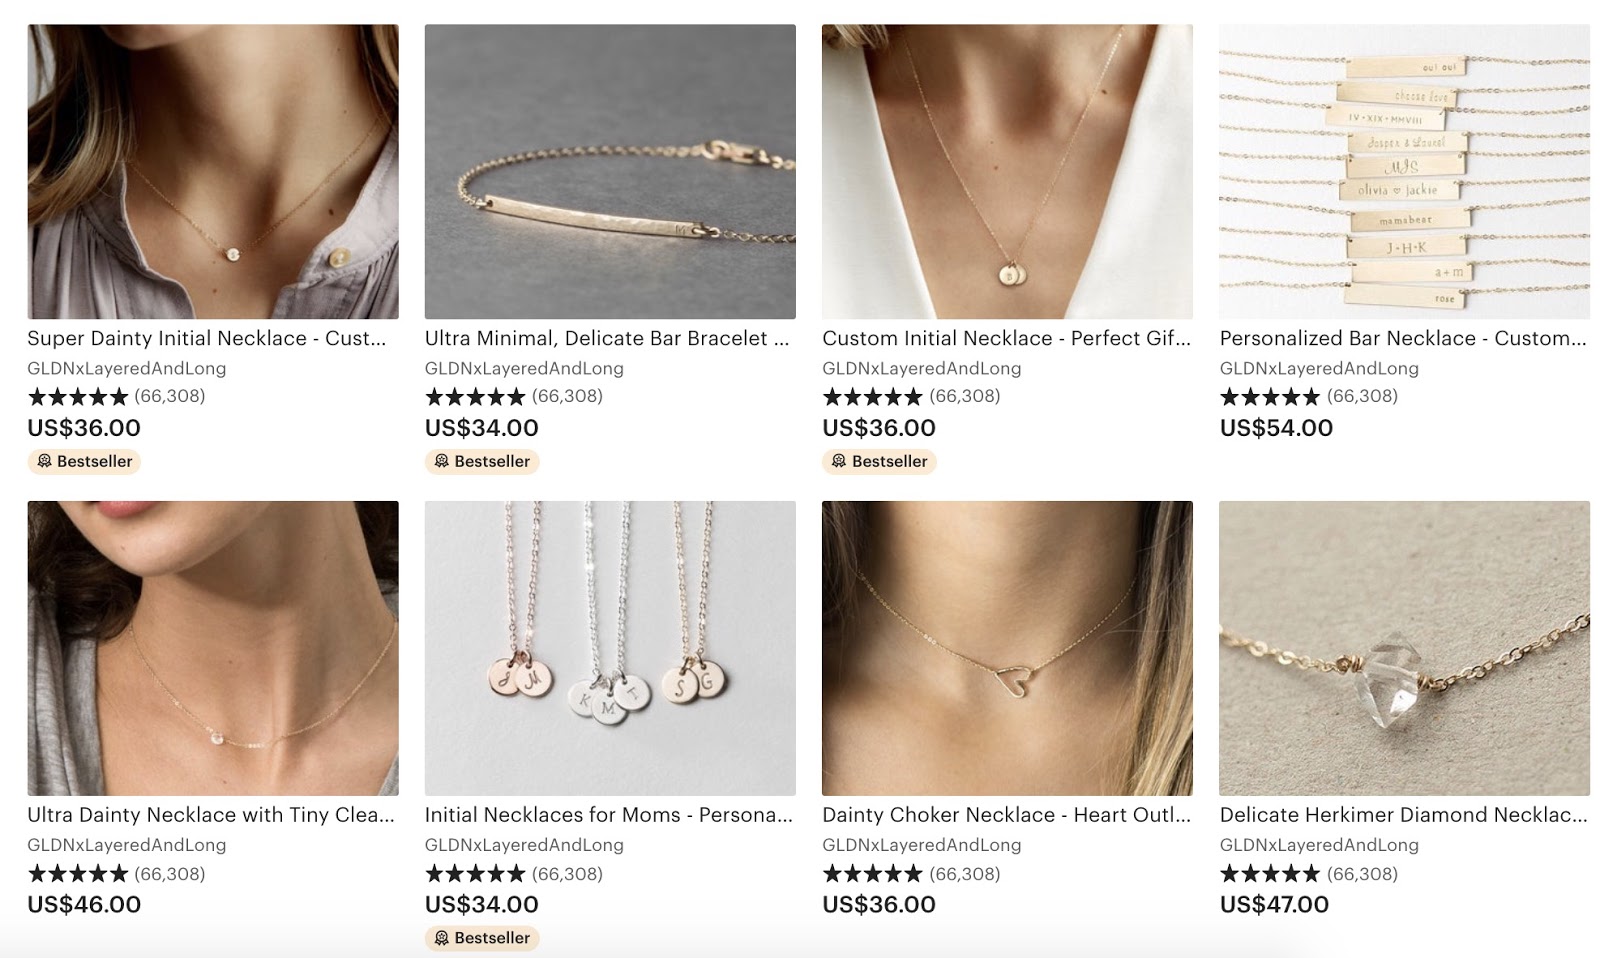 Selling Necklaces on Etsy